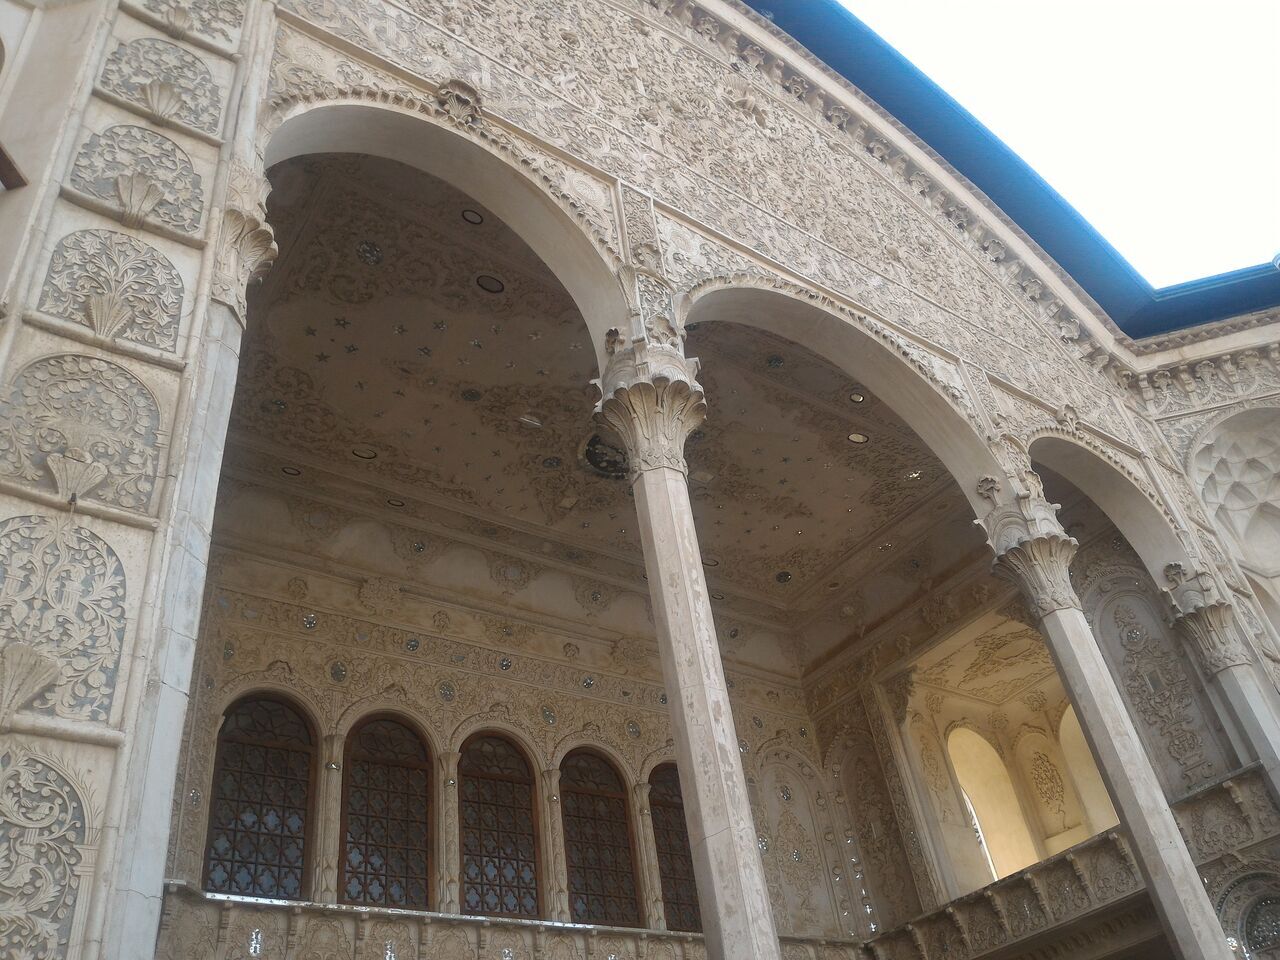 Outstanding historical house in Kashan central Iran